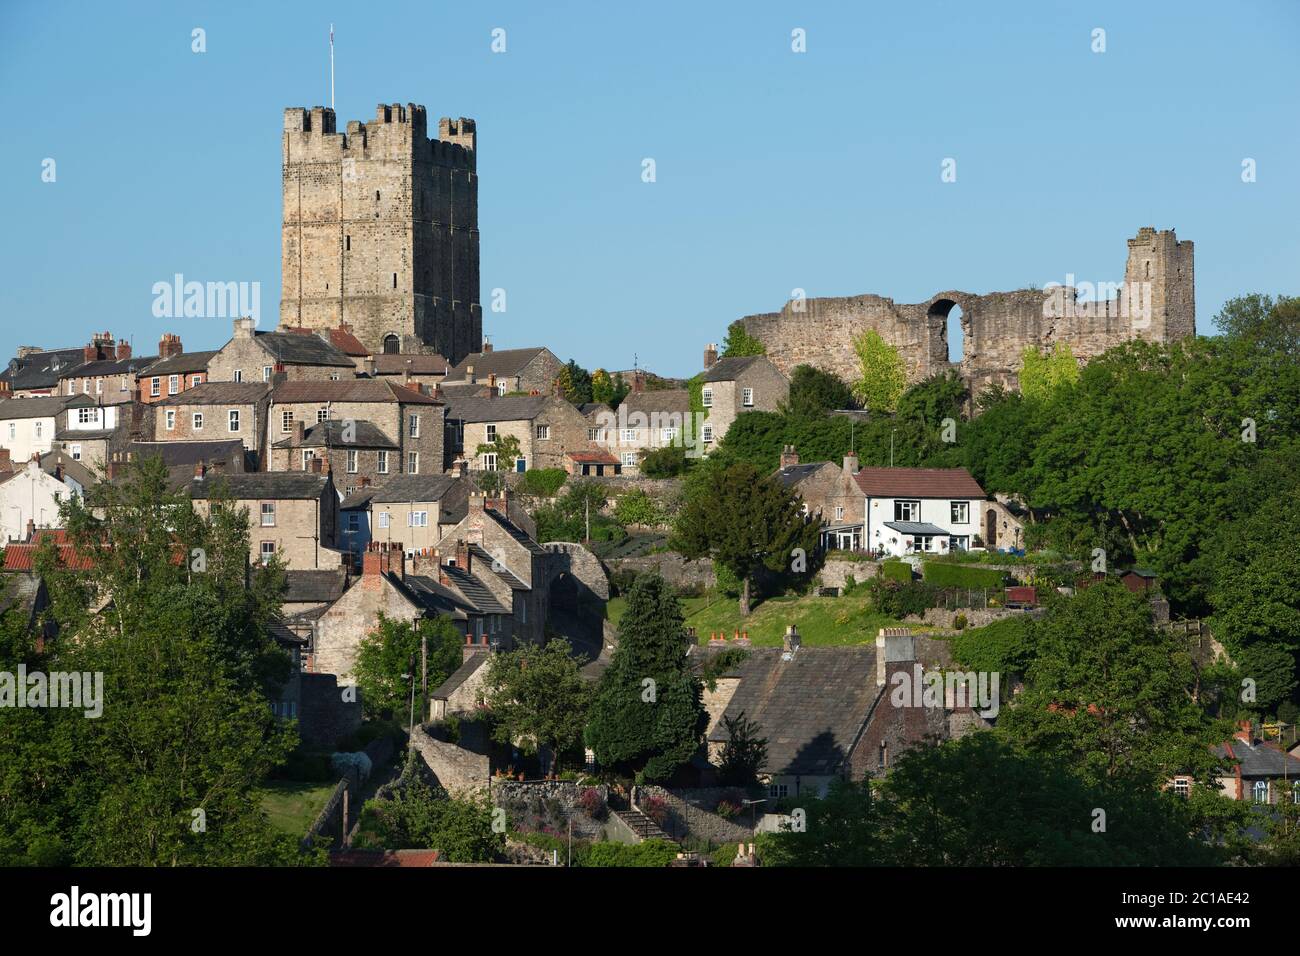 The Keep and walls of Richmond Castle and town, Richmond, North Yorkshire, England, United Kingdom, Europe Stock Photo